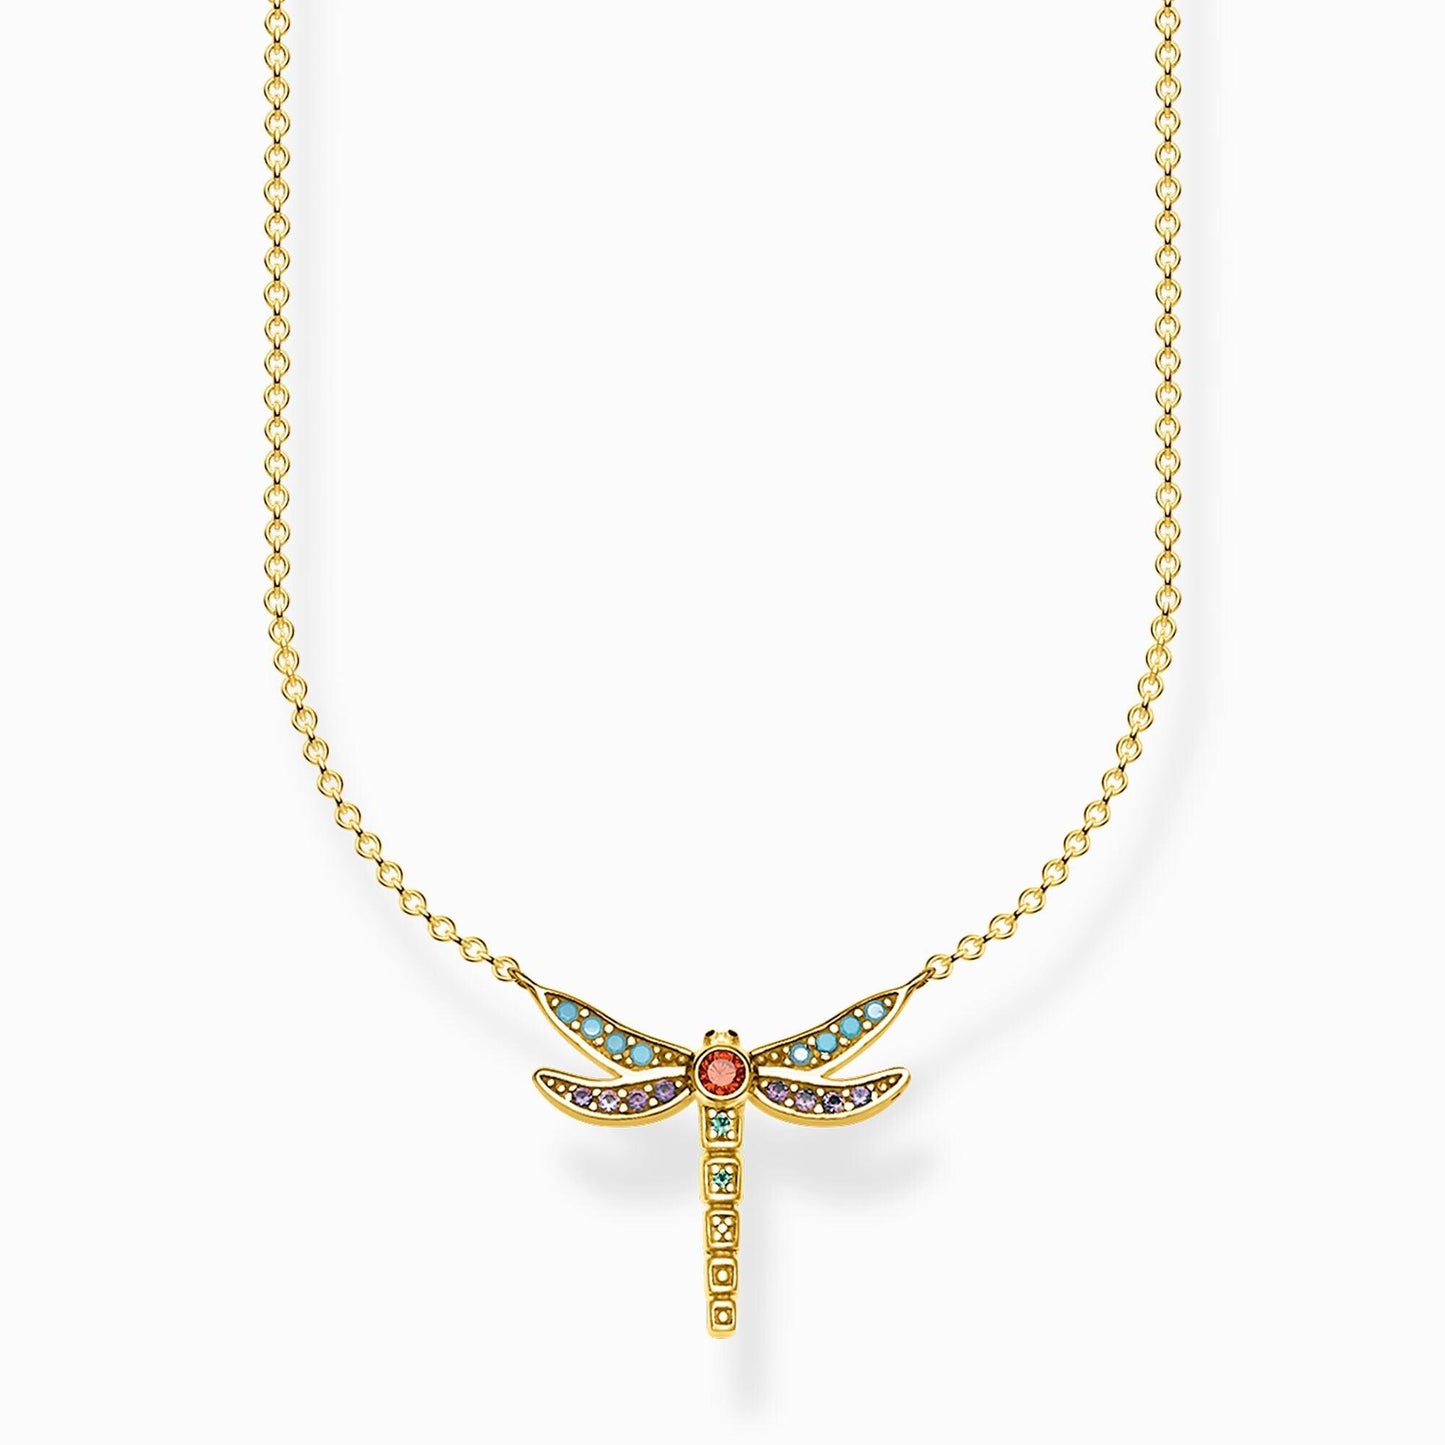 Thomas Sabo Yellow Gold-Plated Dragonfly Necklace KE1837 - Judith Hart Jewellers